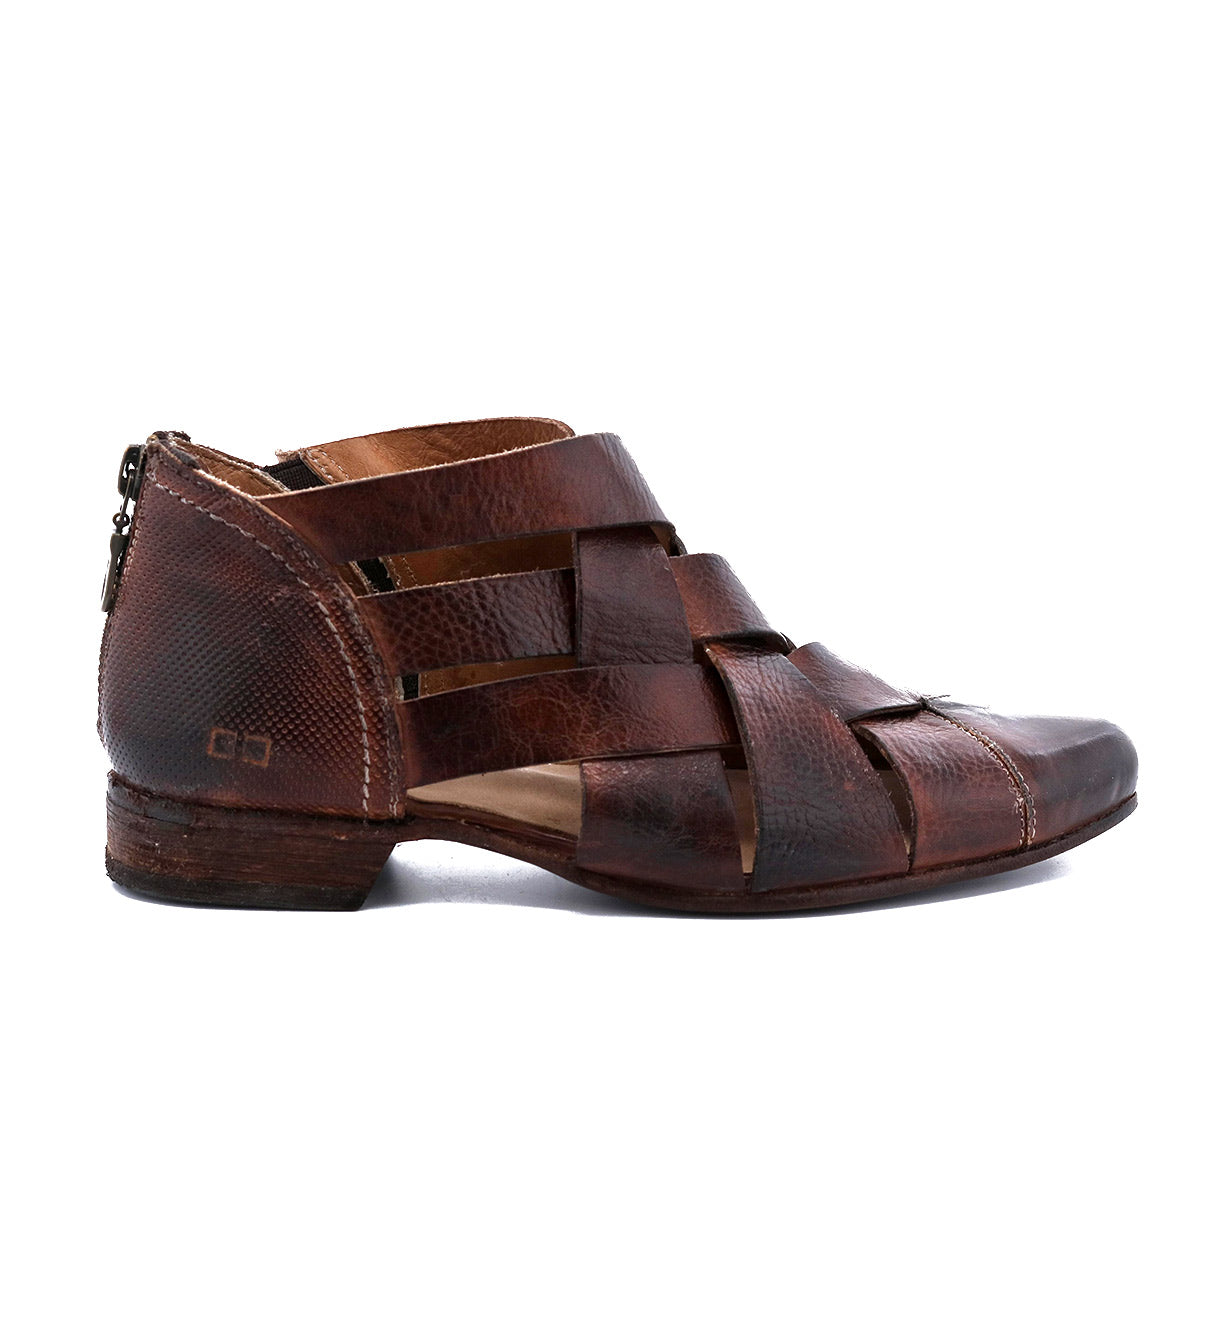 A women's brown leather sandal with straps named Brittany by Bed Stu.